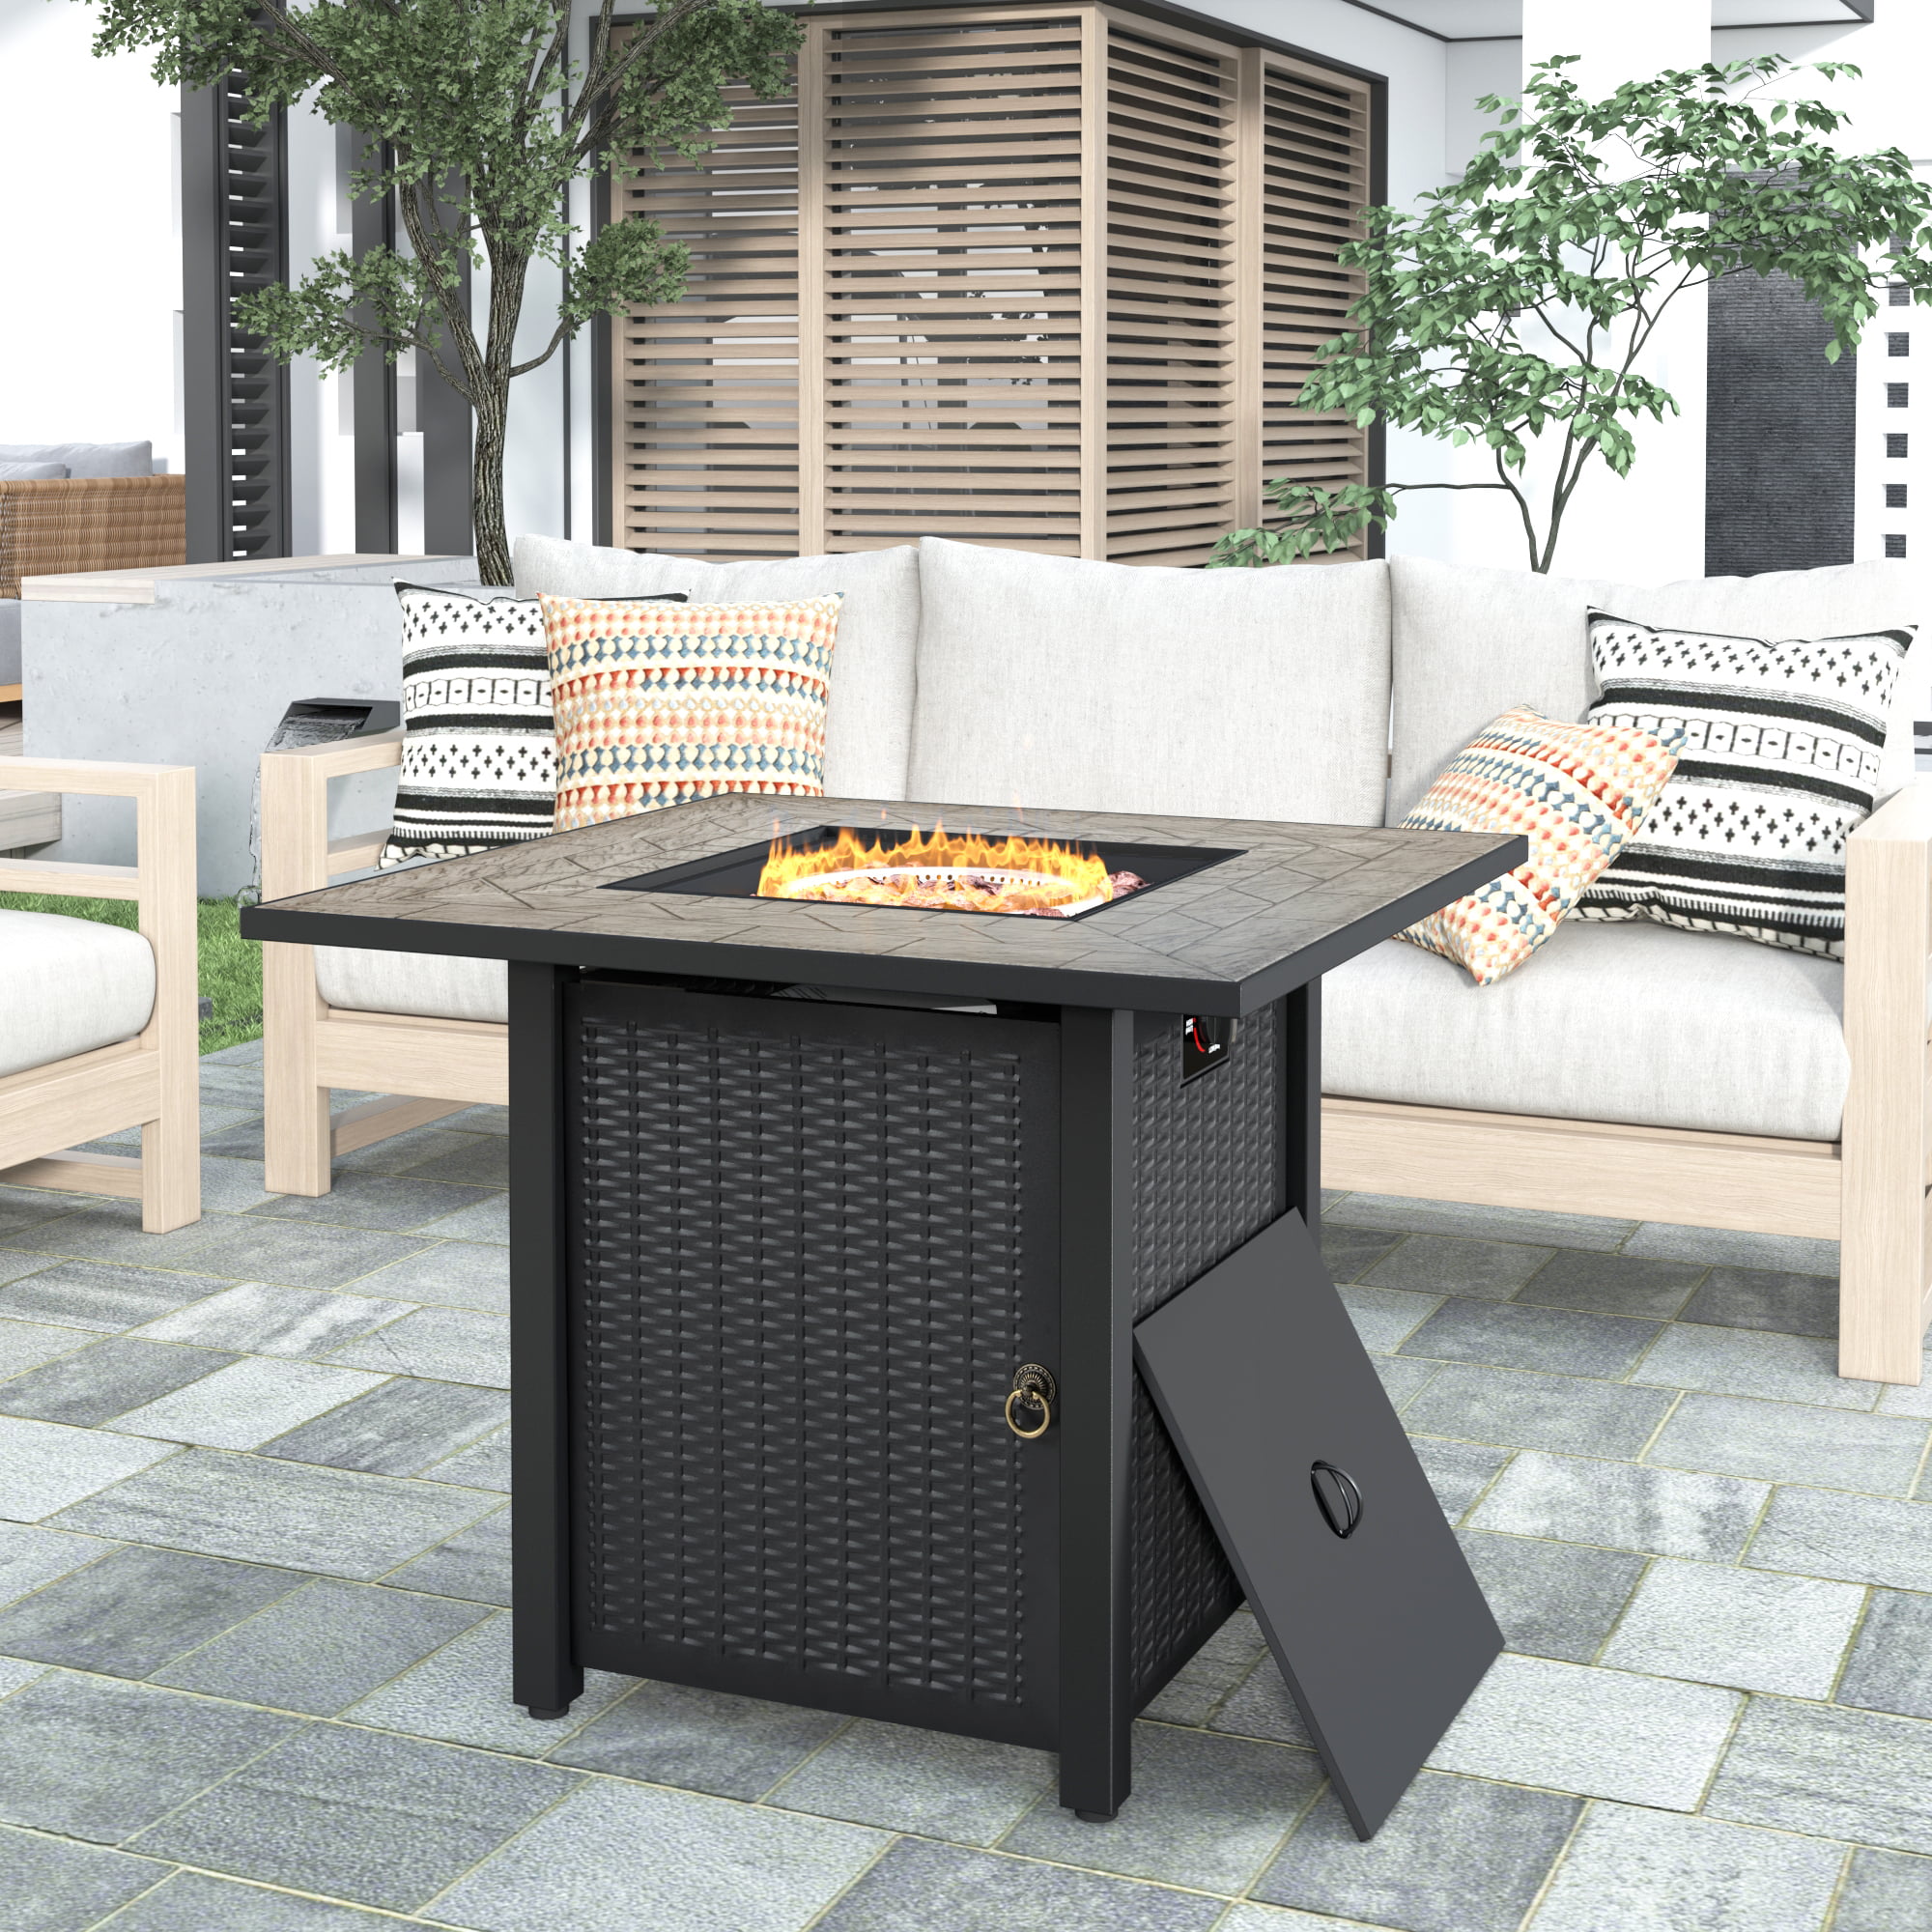 Patio Square Gas Fire Pit Table, 30 Inch Fire Pit Table